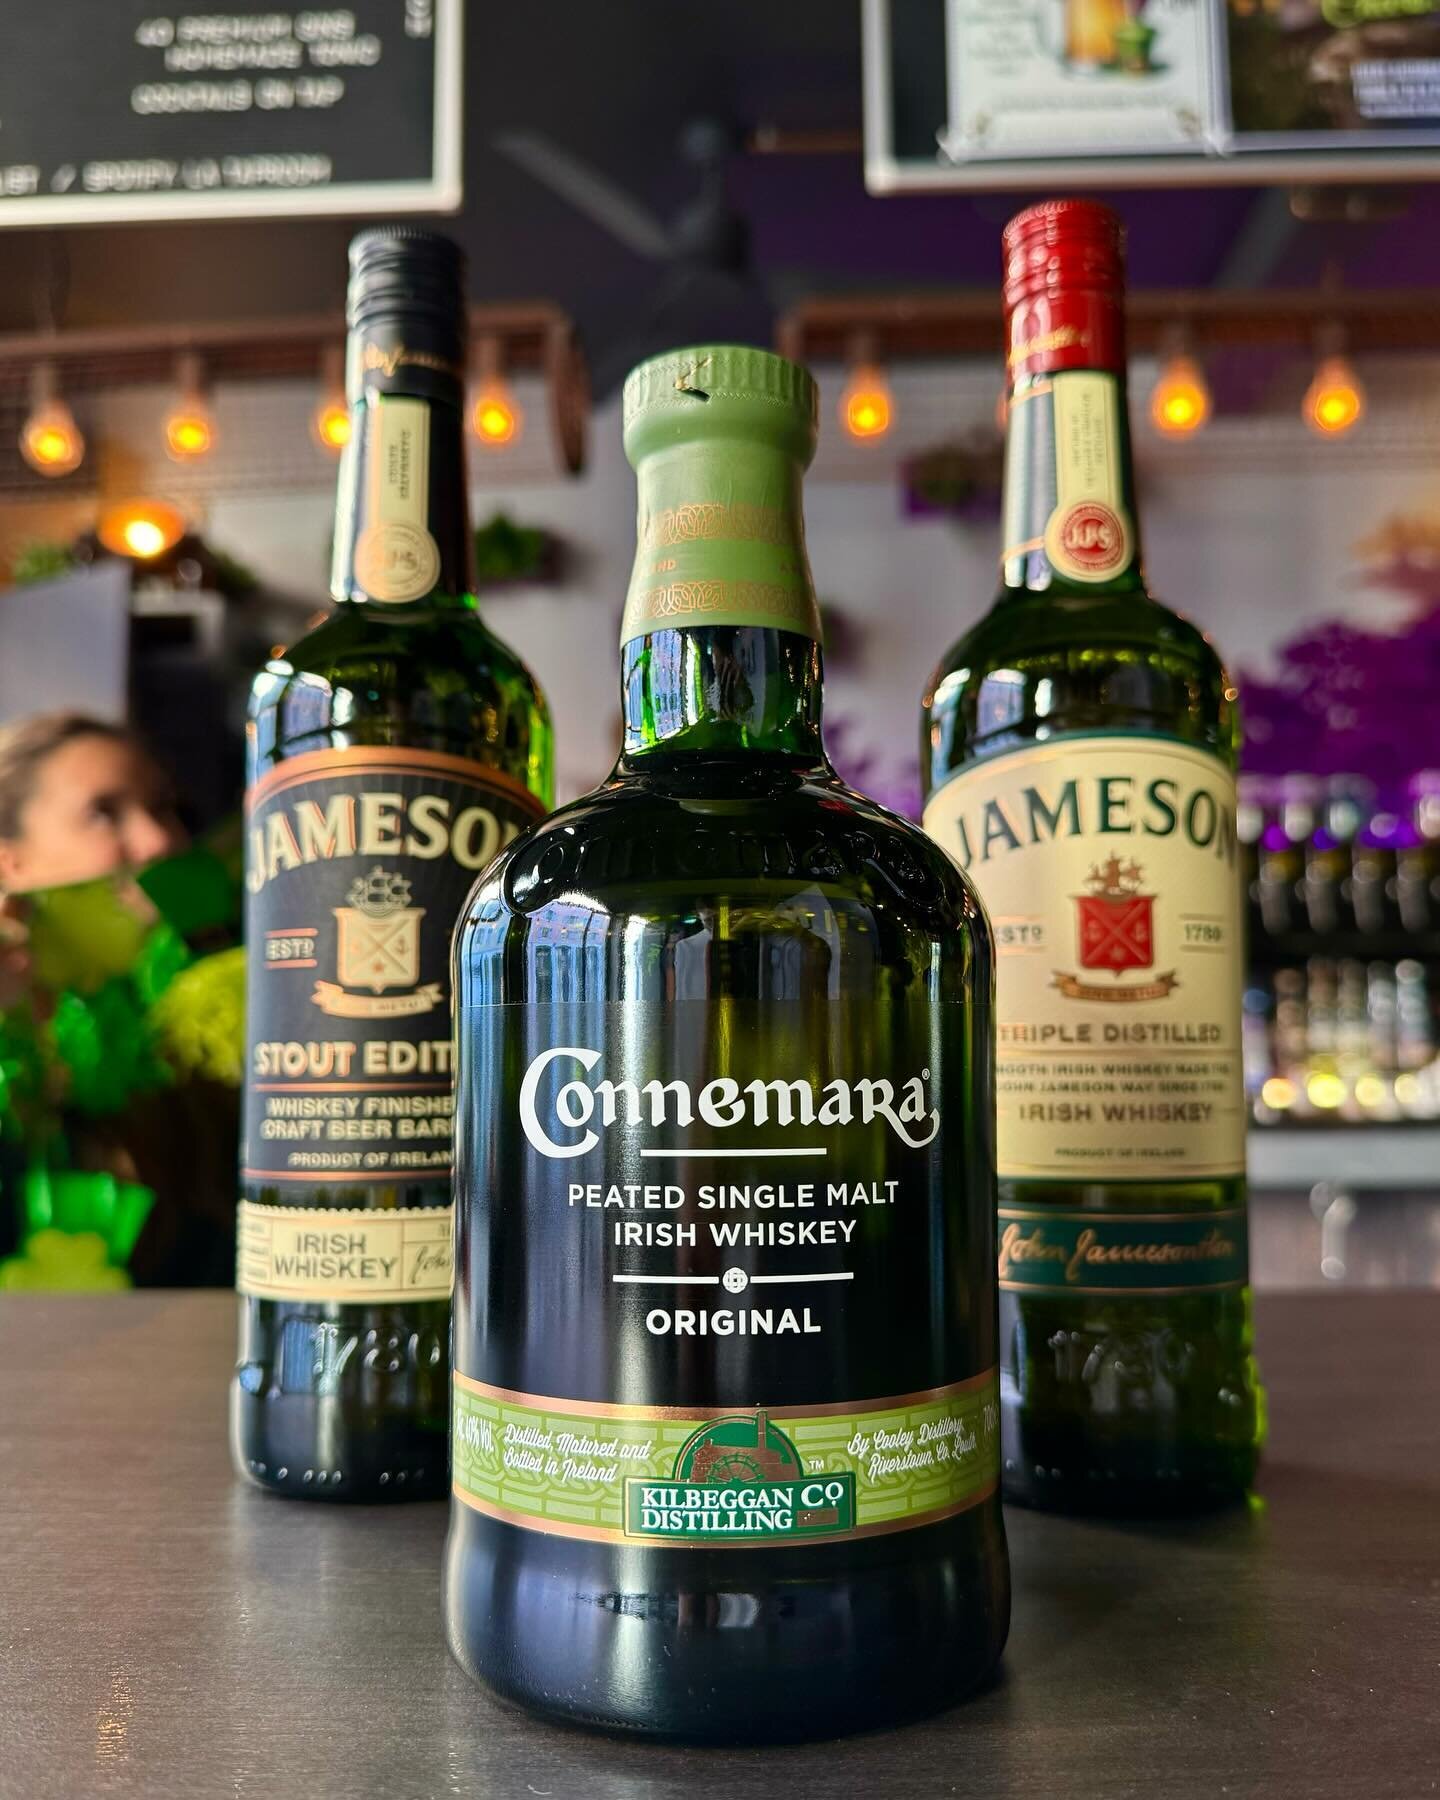 Irish vibes 🍀🥃

When it comes to Irish celebrations, it&rsquo;s all about Irish products! And for the occasion, your favorite team has selected 3 Irish whiskies to taste 😋🇮🇪

[Slide 1] Connemara: The lone Irish whiskey with a peaty single malt t